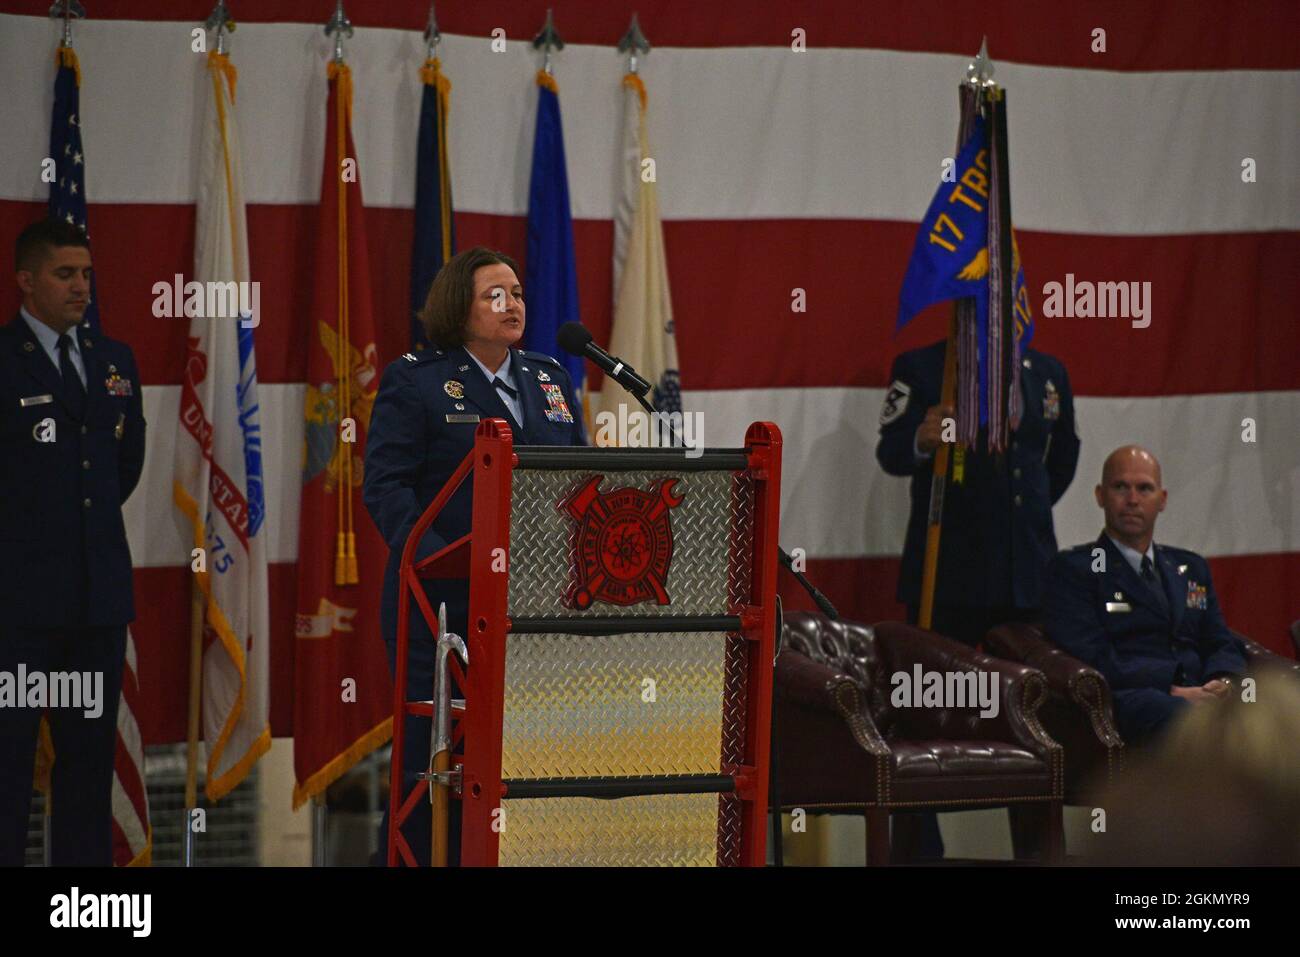 U.S. Air Force Col. Angelina Maguinness, 17th Training Group commander, addresses the audience during the change of command ceremony at the Louis F. Garland Department of Defense Fire Academy High Bay on Goodfellow Air Force Base, Texas, June 1, 2021. Maguinness welcomed the 312th Training Squadron incoming commander, Maj. Samuel Logan, and thanked the 312th TRS outgoing commander, Lt. Col. Kevin Boss, for his hard work and dedication. Stock Photo